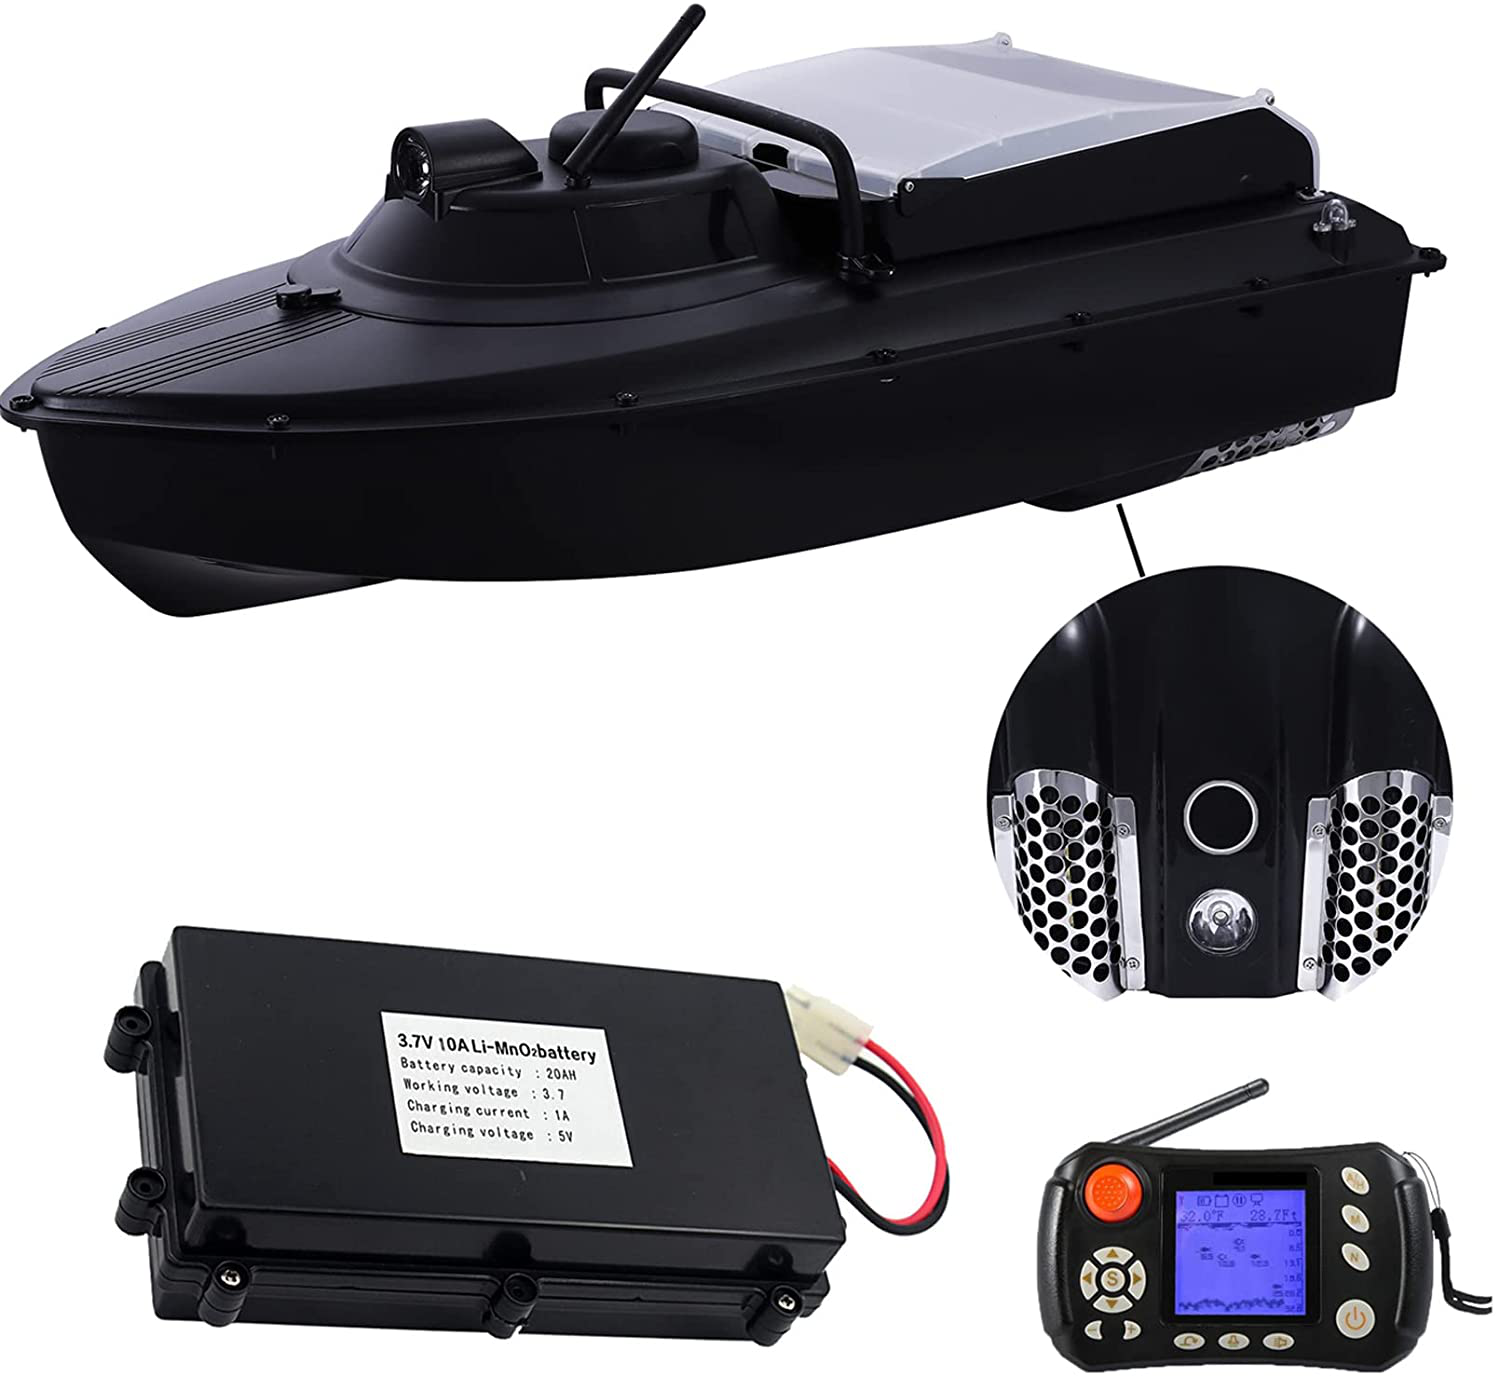 GPS Wireless Control Fishing Bait Boat Containers Smart Fish